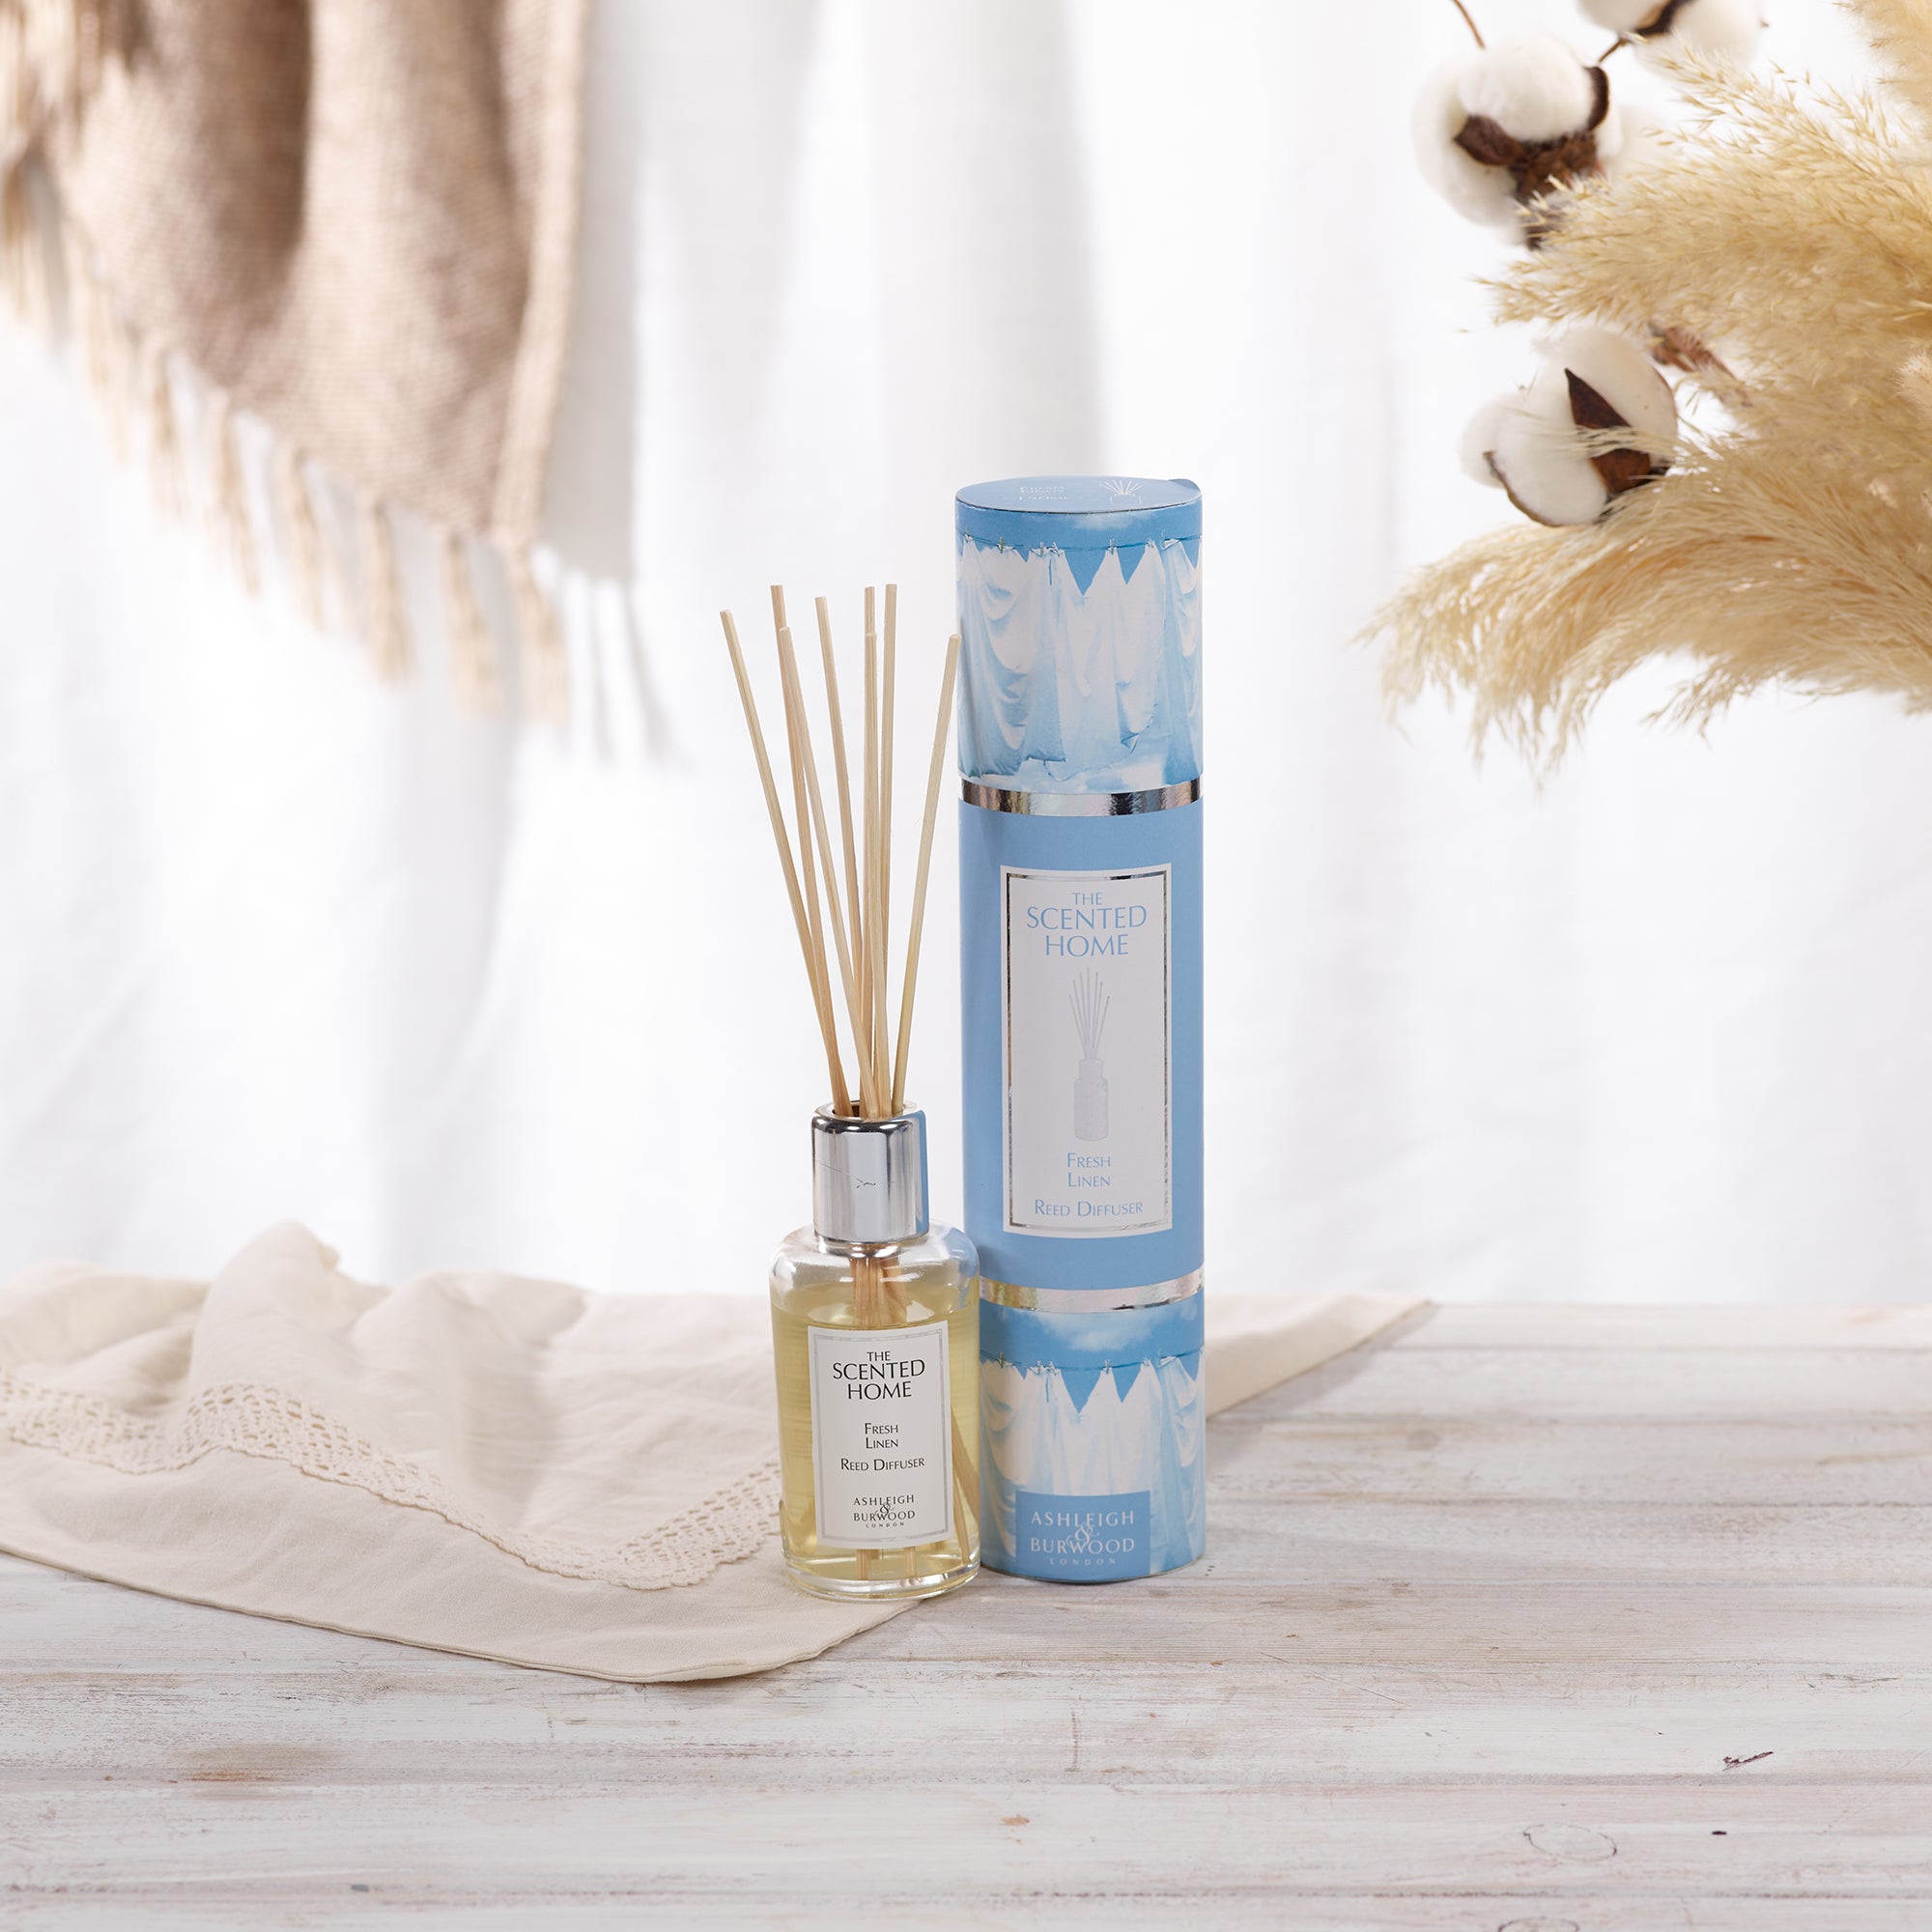 The Scented Home Fresh Linen Diffuser